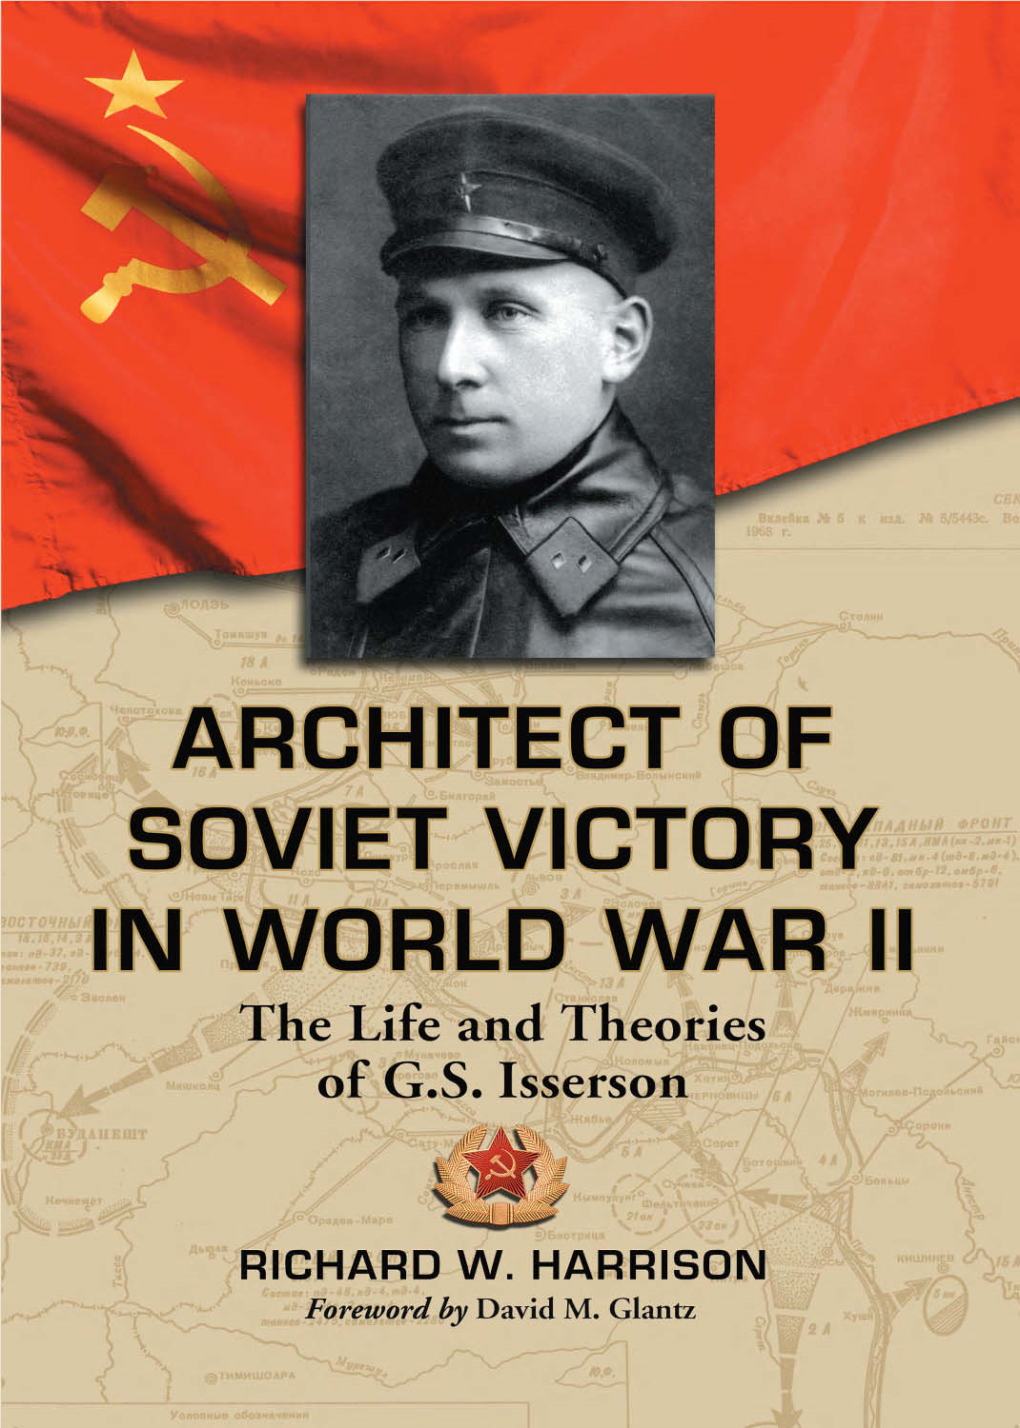 Architect of Soviet Victory in World War II This Page Intentionally Left Blank Architect of Soviet Victory in World War II the Life and Theories of G.S